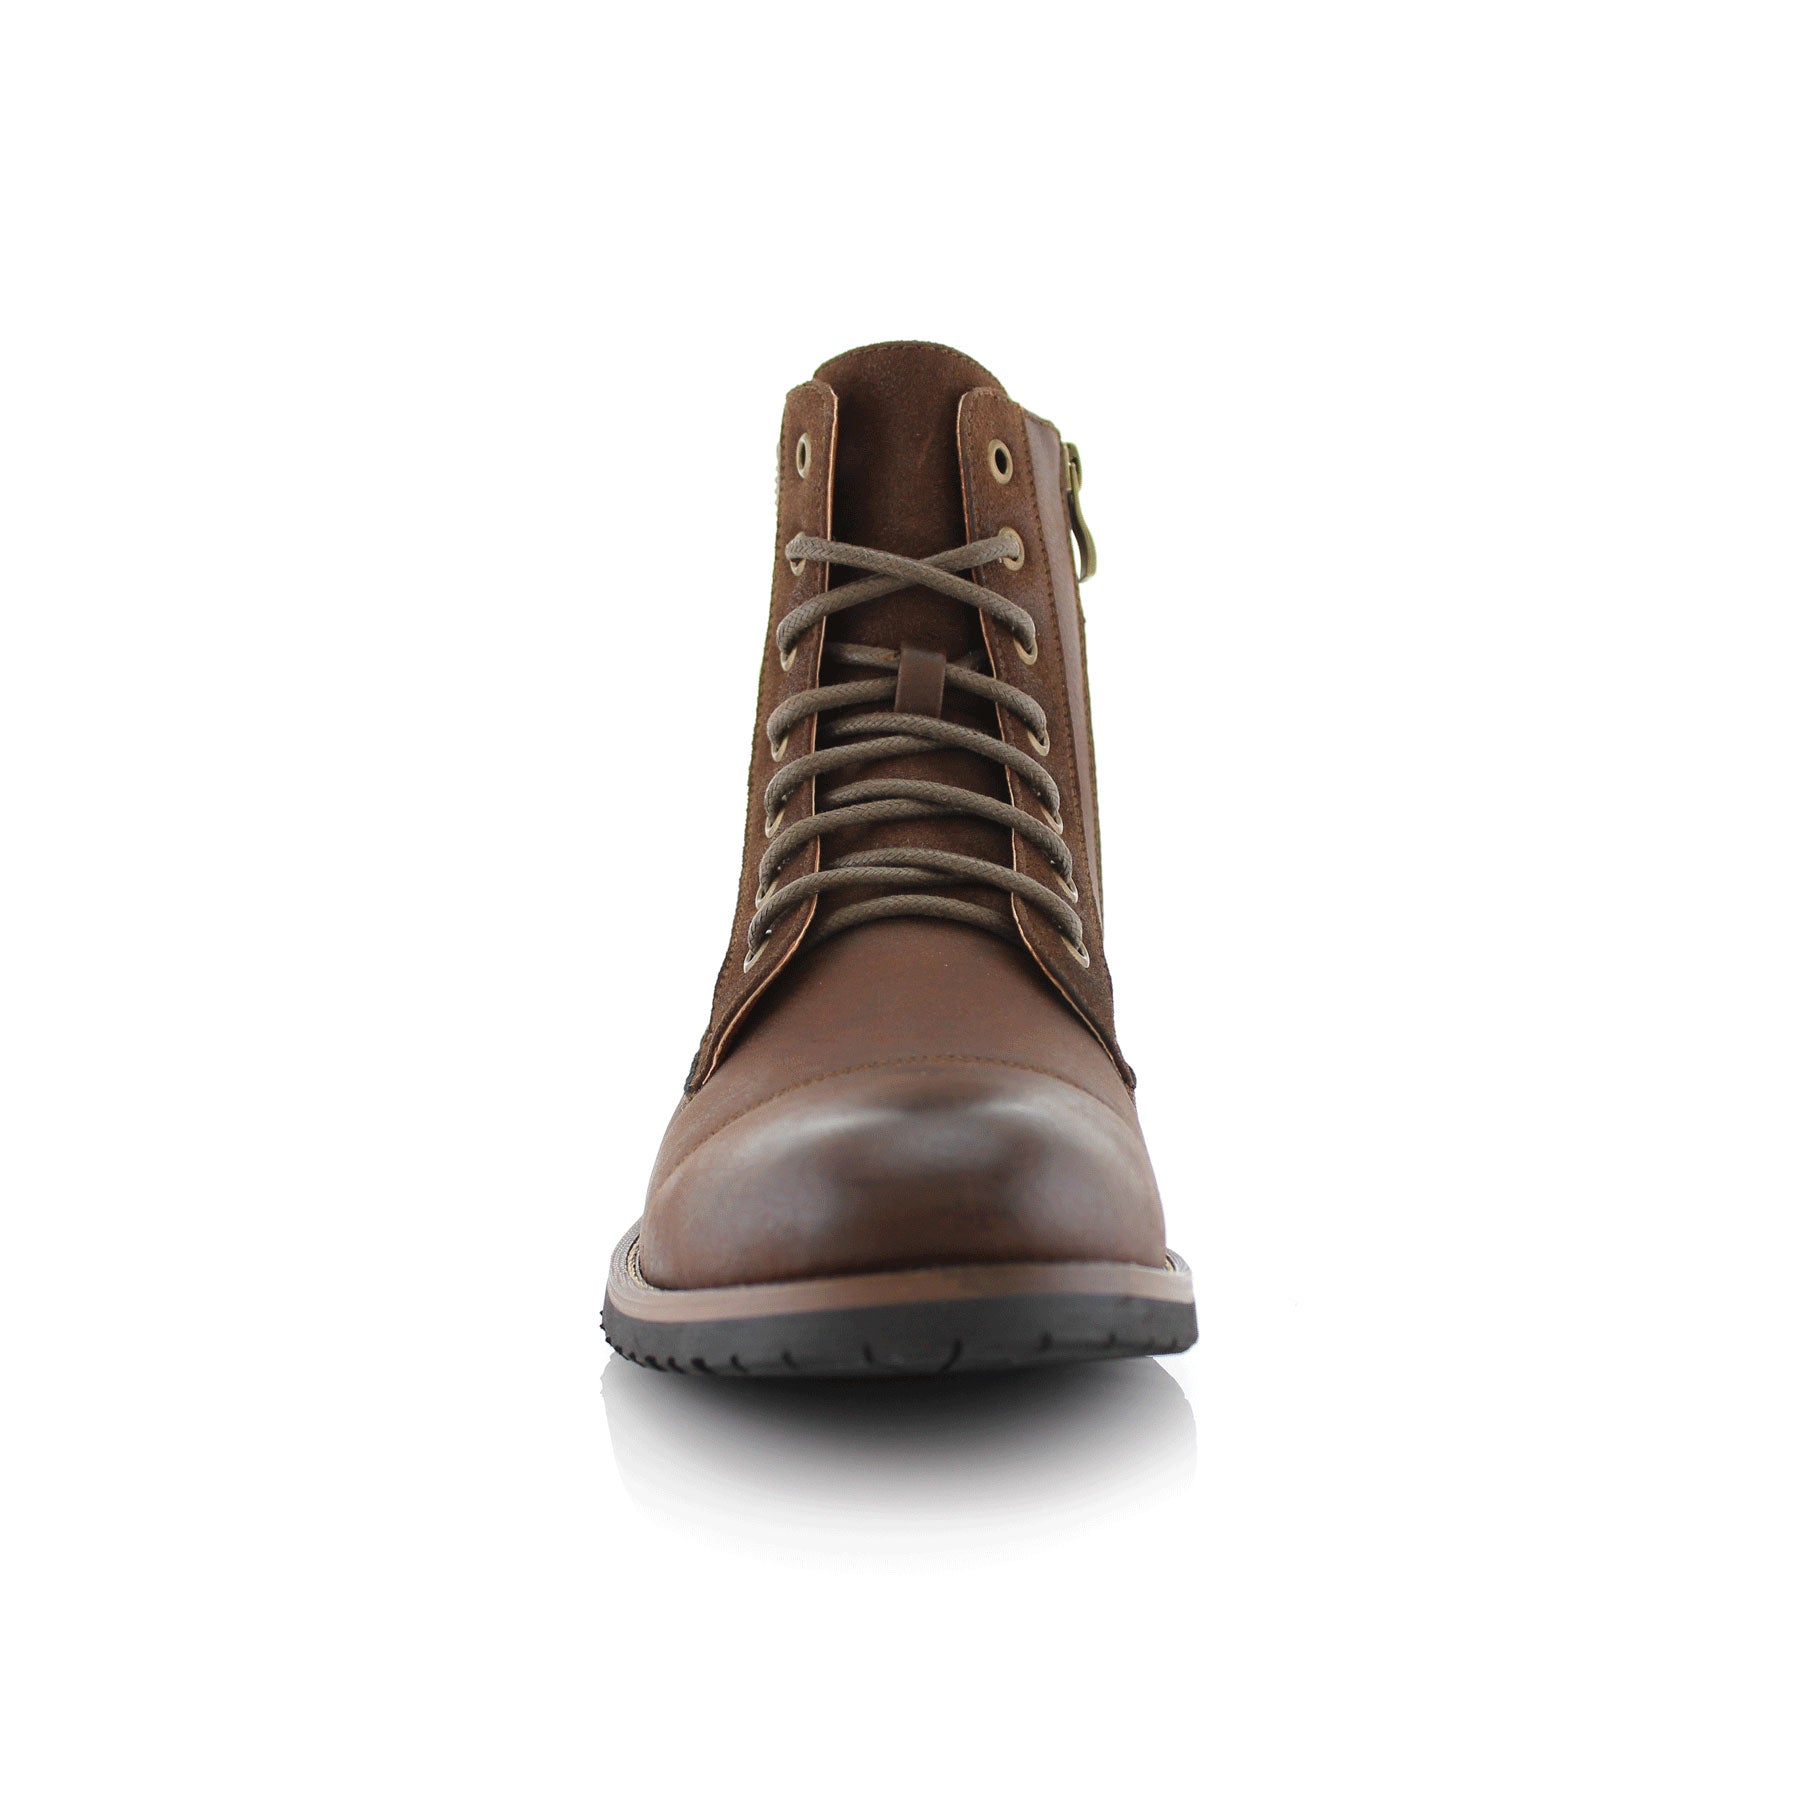 Duo-Textured Cap-Toe Boots | Reid by Ferro Aldo | Conal Footwear | Front Angle View